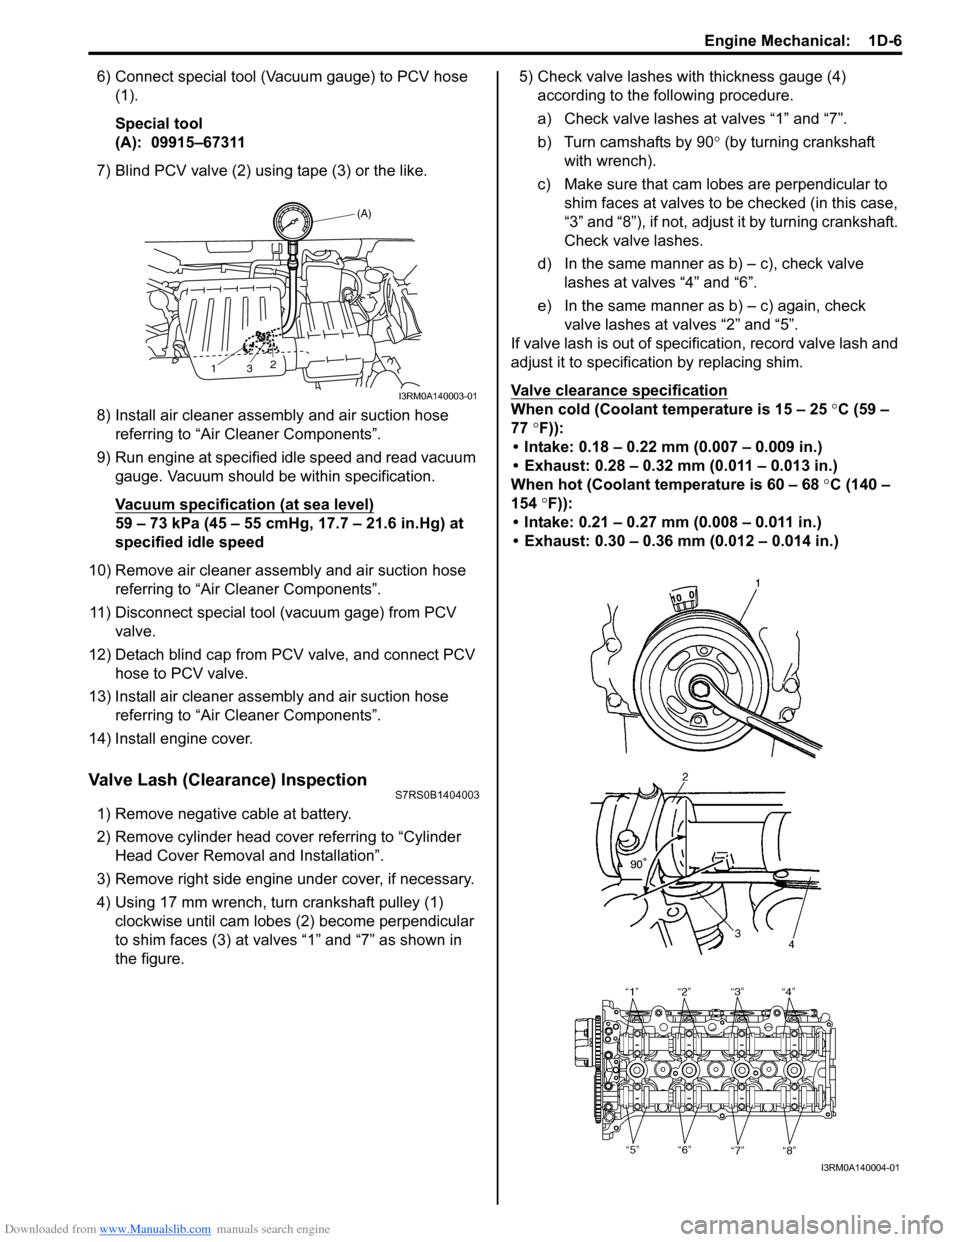 SUZUKI SWIFT 2006 2.G Service Service Manual Downloaded from www.Manualslib.com manuals search engine Engine Mechanical:  1D-6
6) Connect special tool (Vacuum gauge) to PCV hose (1).
Special tool
(A):  09915–67311
7) Blind PCV valve (2) using 